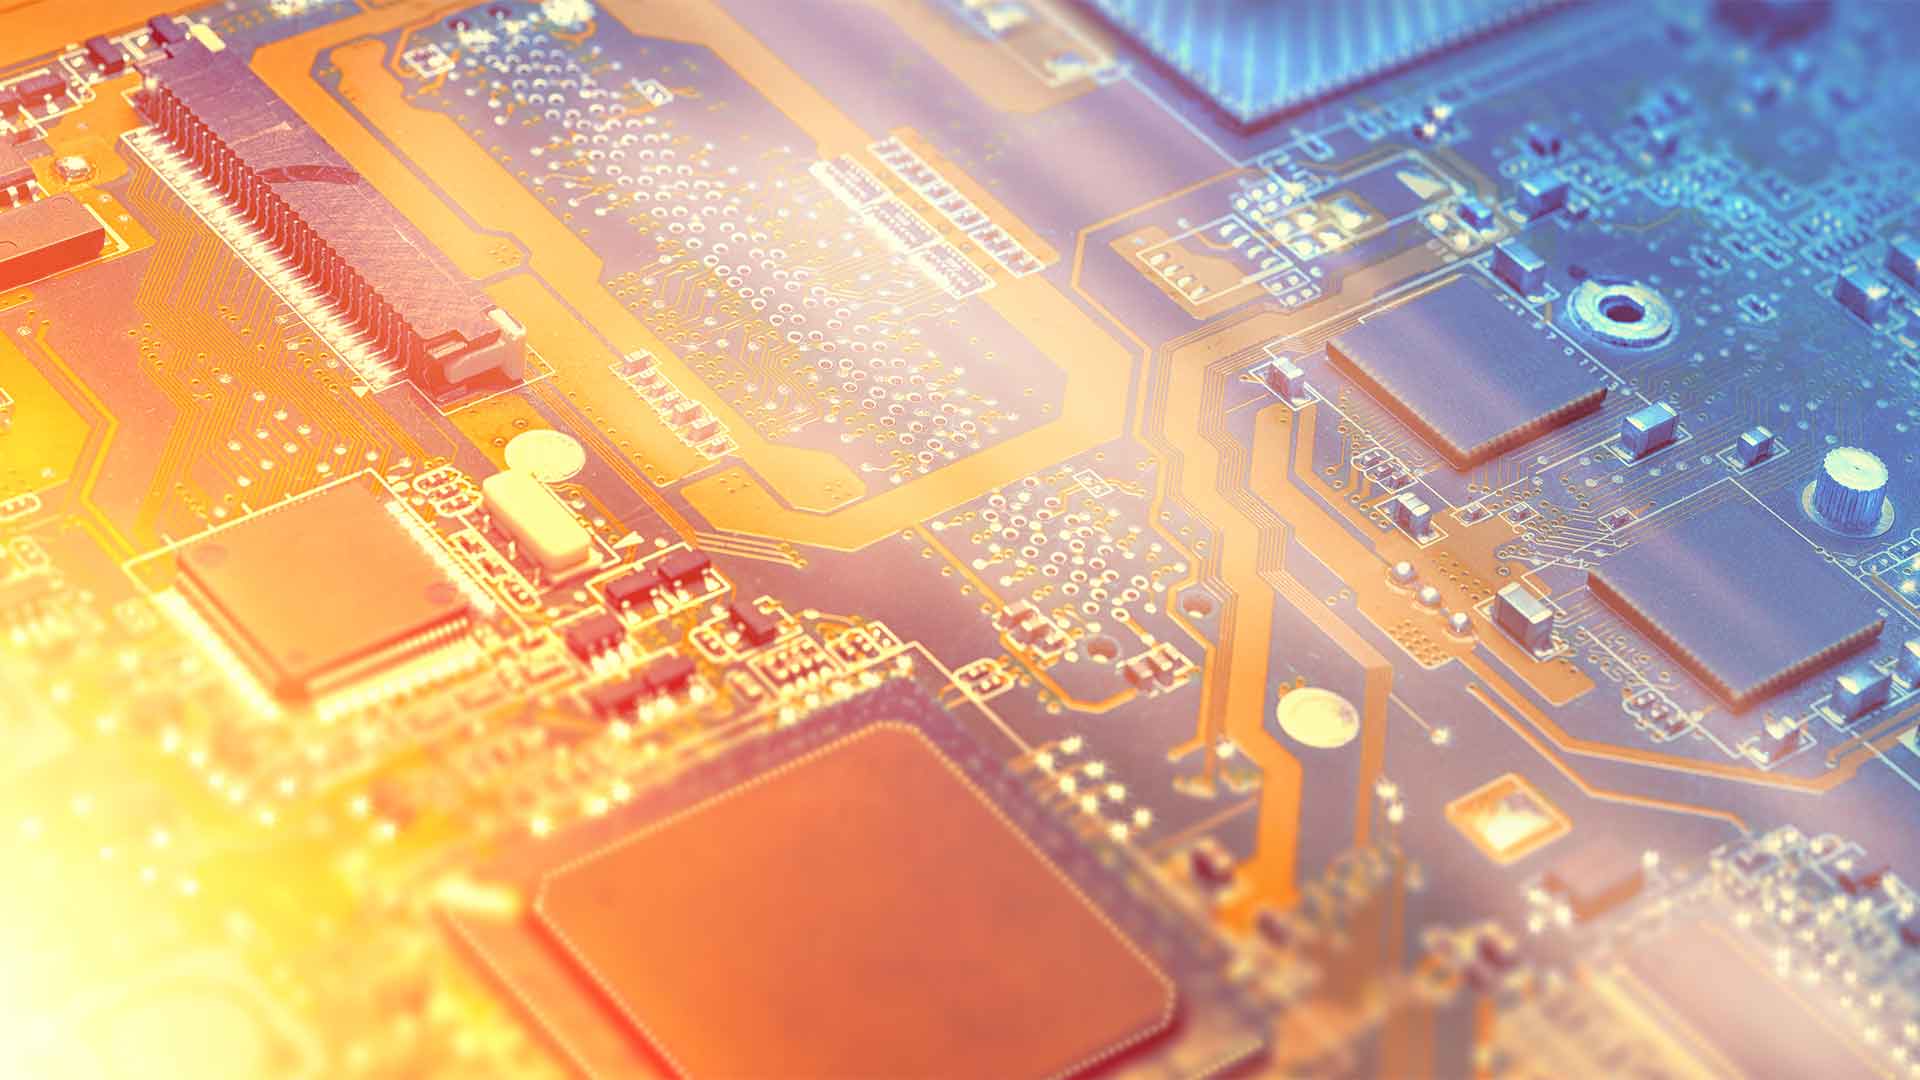 Close up of a computer board